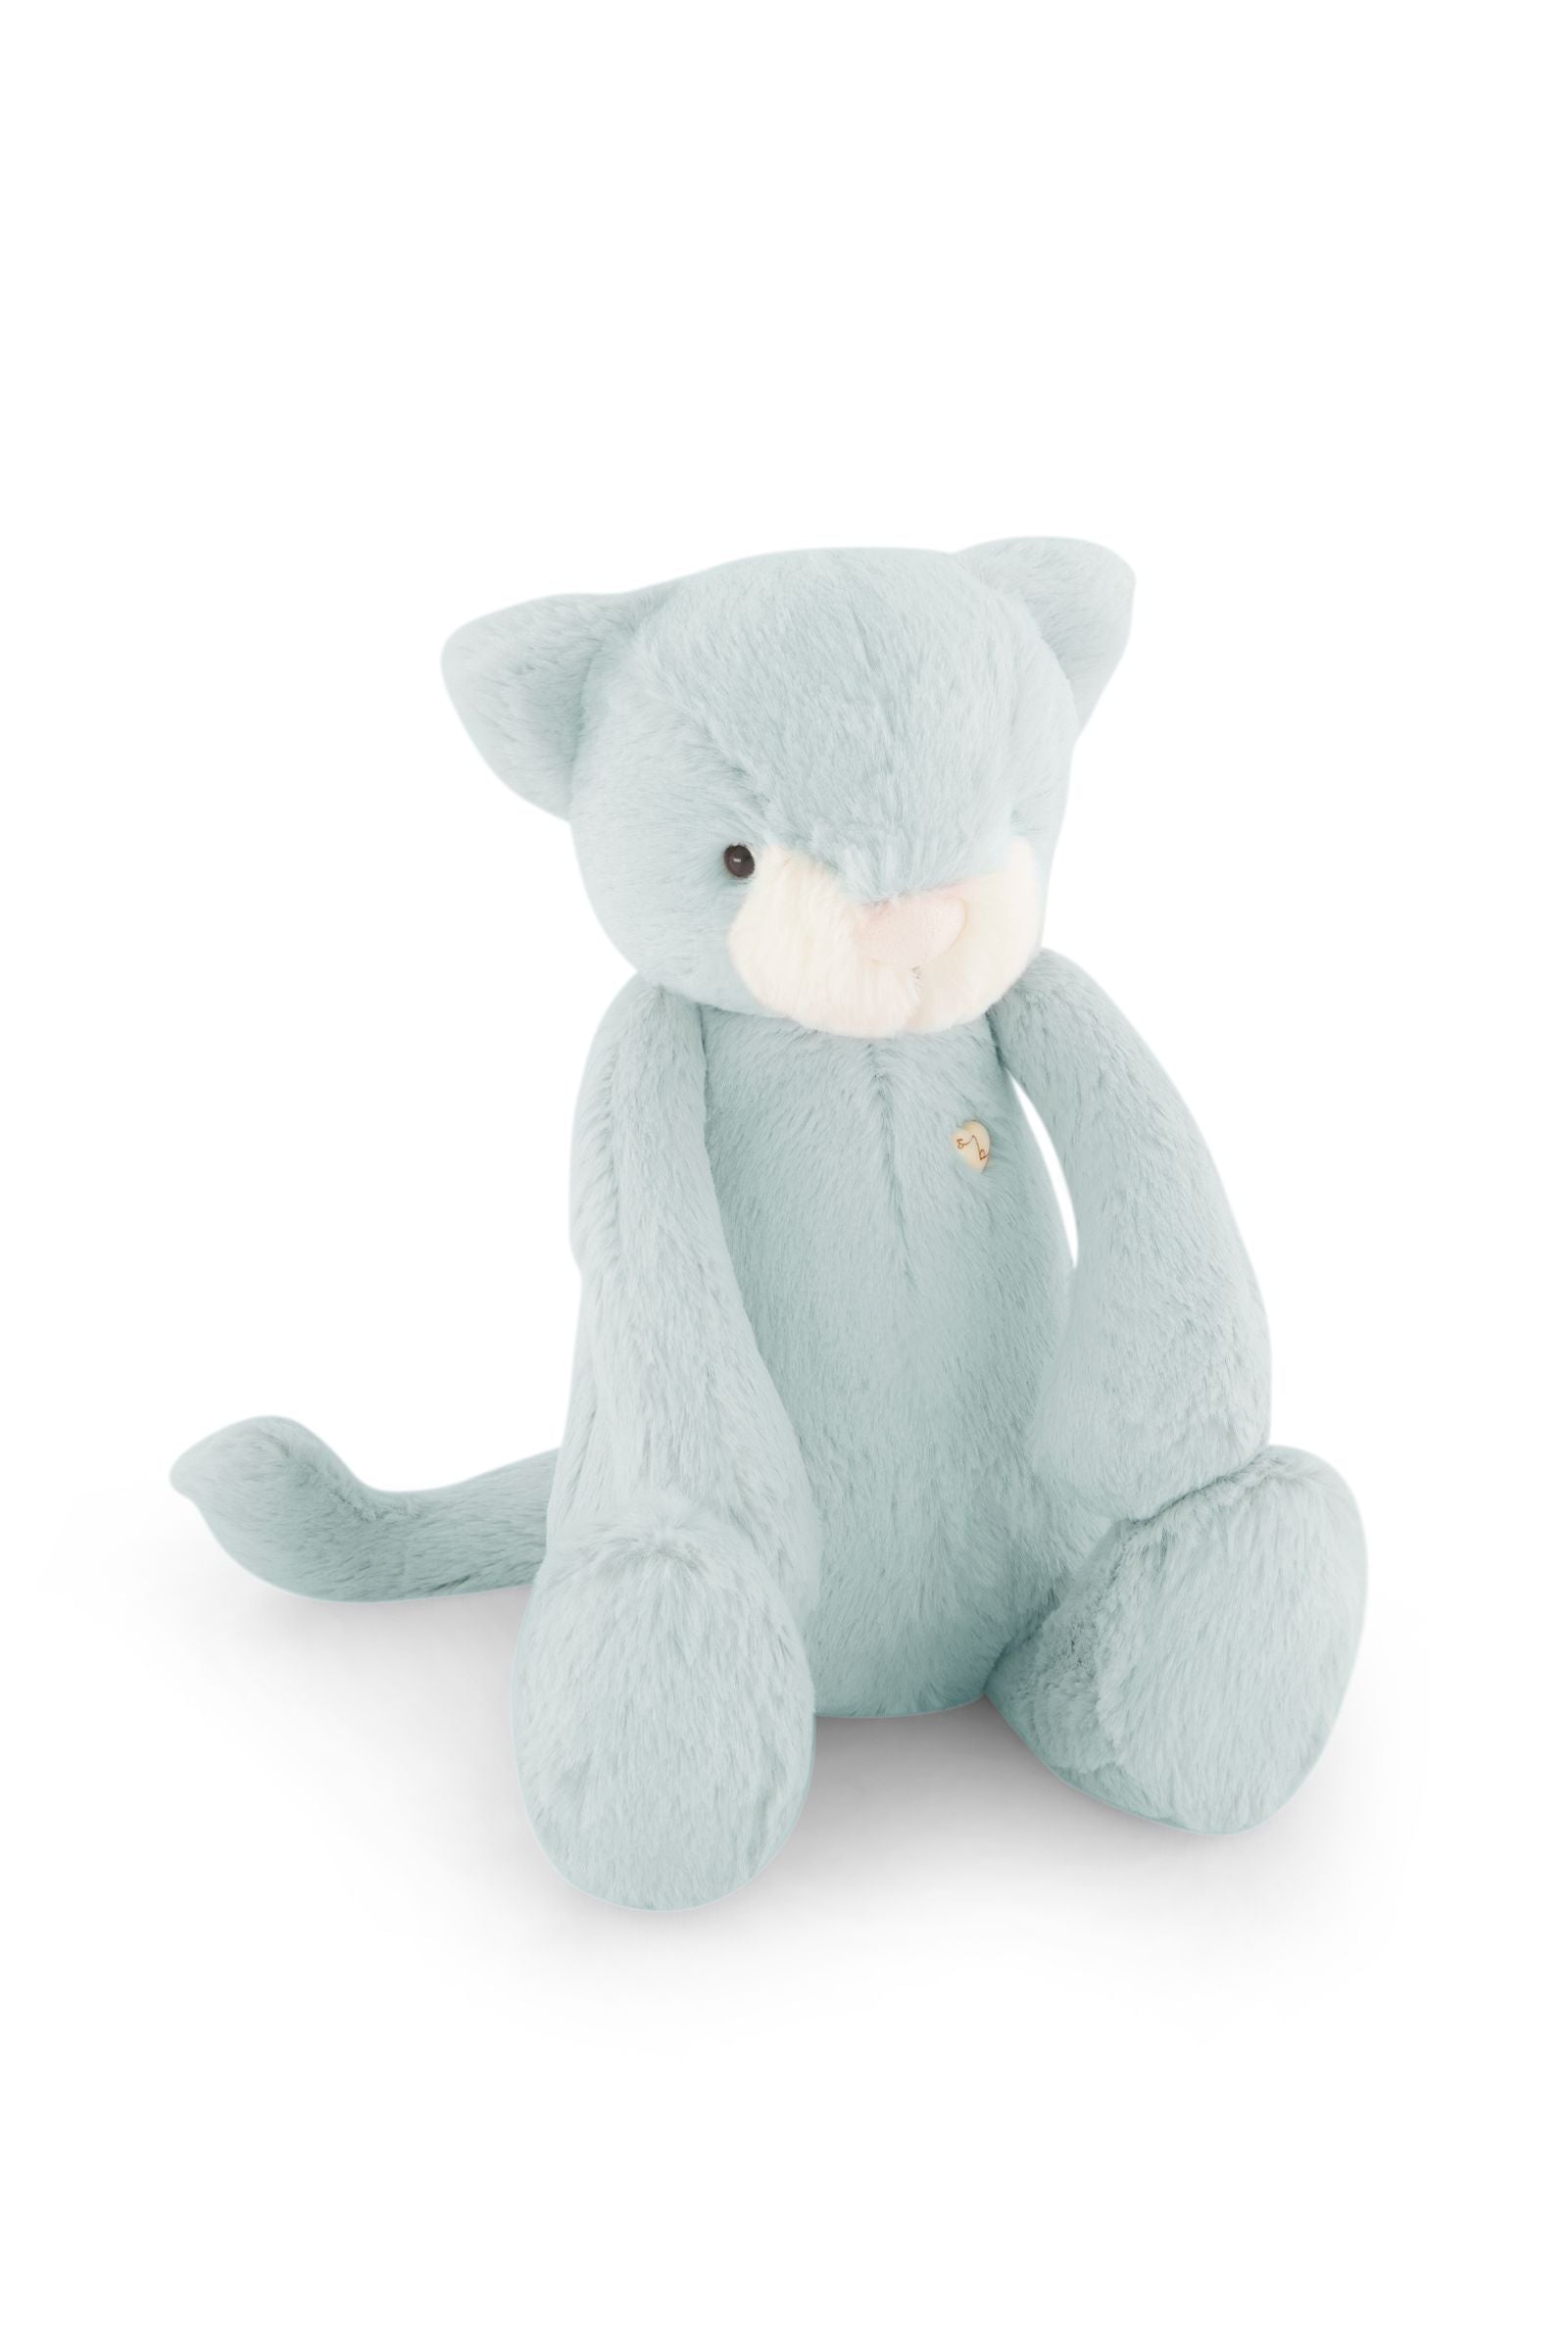 Snuggle Bunnies - Elsie the Kitty - Sprout 30cm-Toys-Jamie Kay-The Bay Room